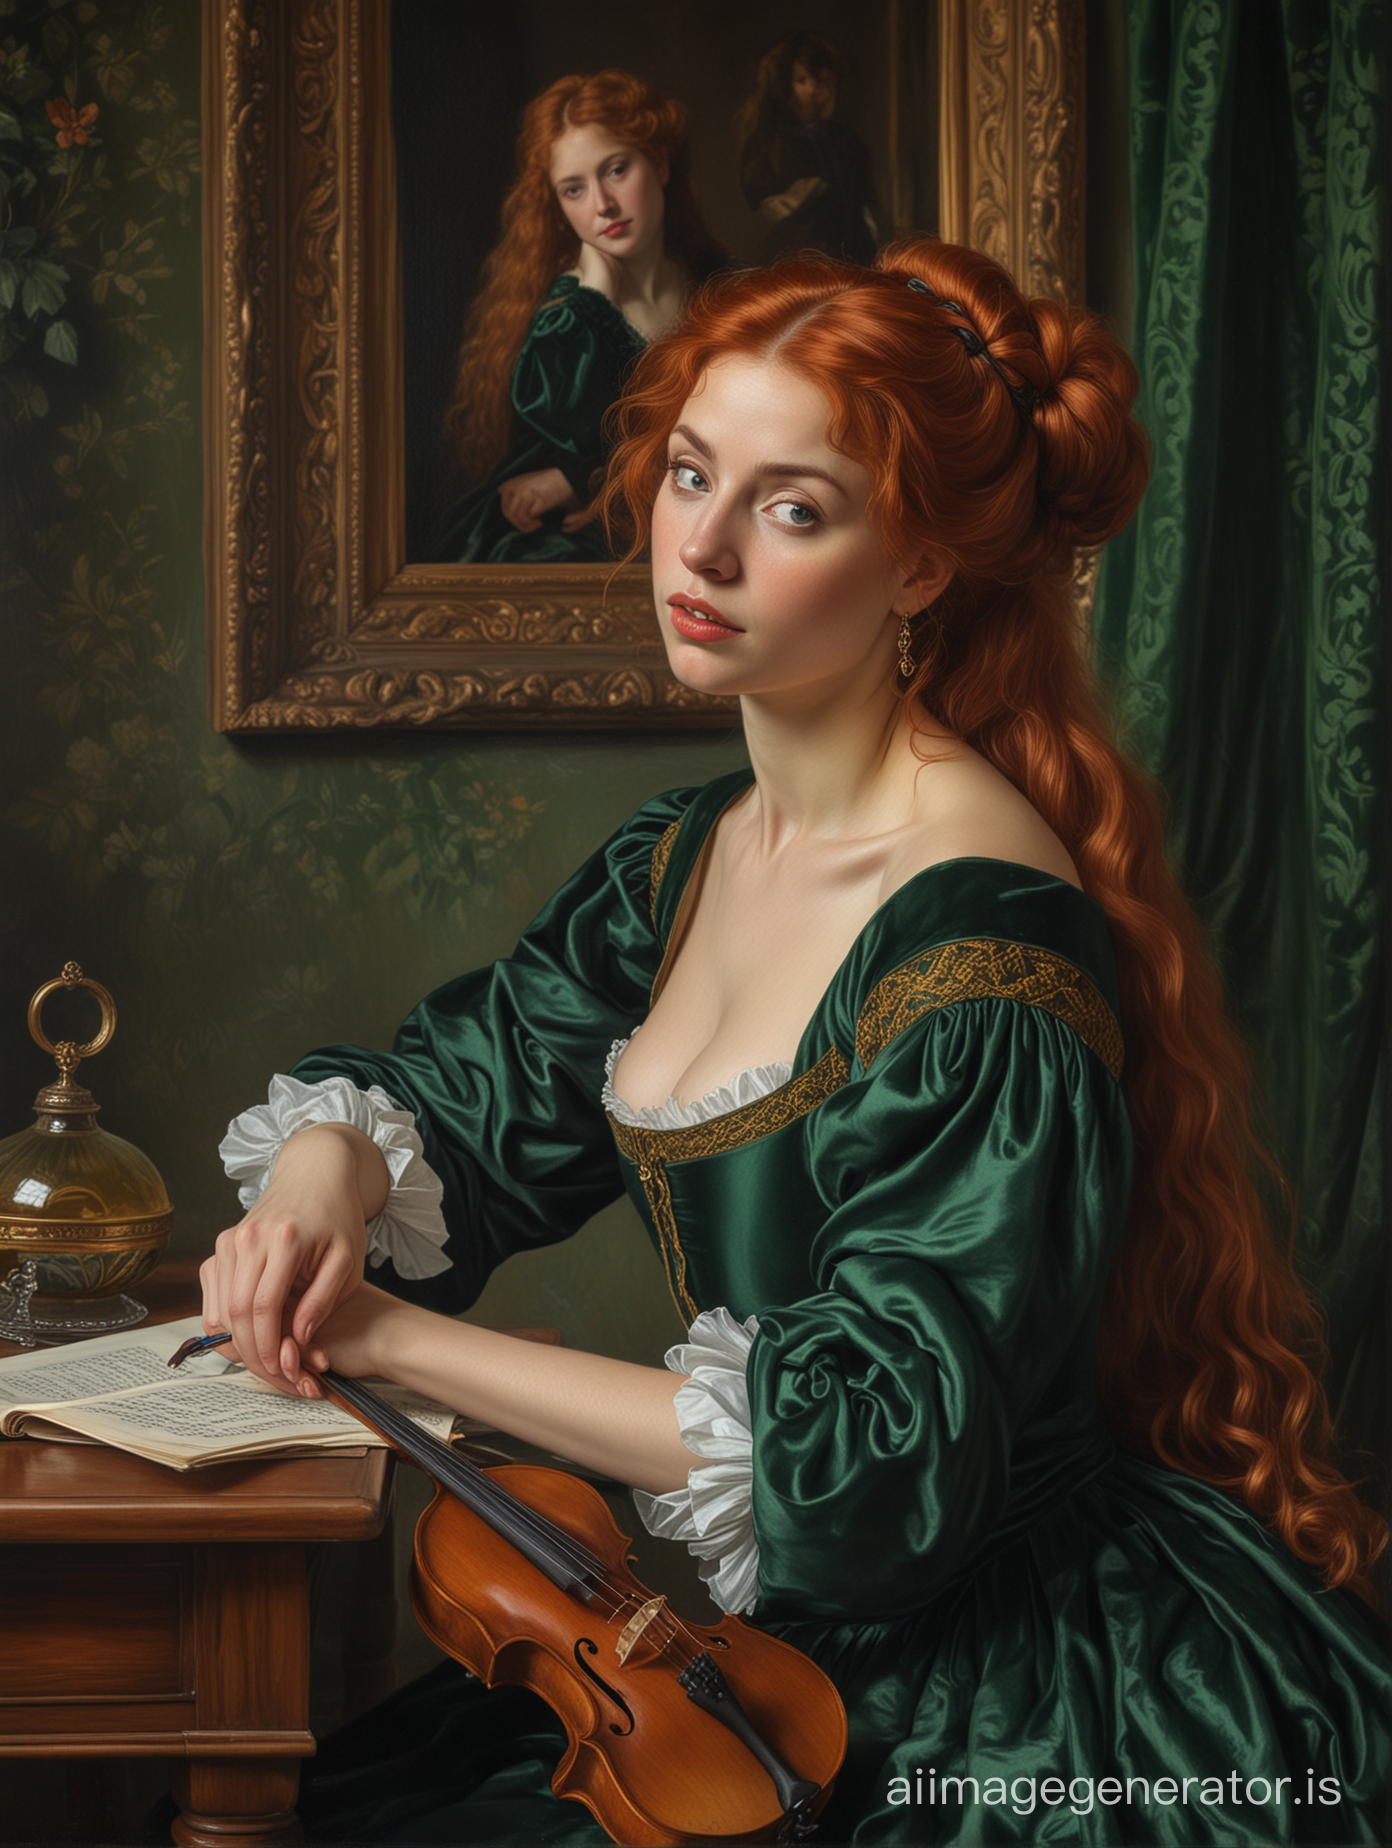 A masterpiece in the Pre-Raphaelite style, a large red-haired bored woman of about 40 with large facial features, thick lips, hair tied at the back of her head, in a dark green velvet dress sits at a small table, in profile, a violin hangs on the wall in front of her, the woman touches the violin with her fingers , dark green velvet curtain in the background, sophisticated dramatic lighting, oil on canvas, brush strokes, masterpiece in the style of Dante Gabriel Rossetti